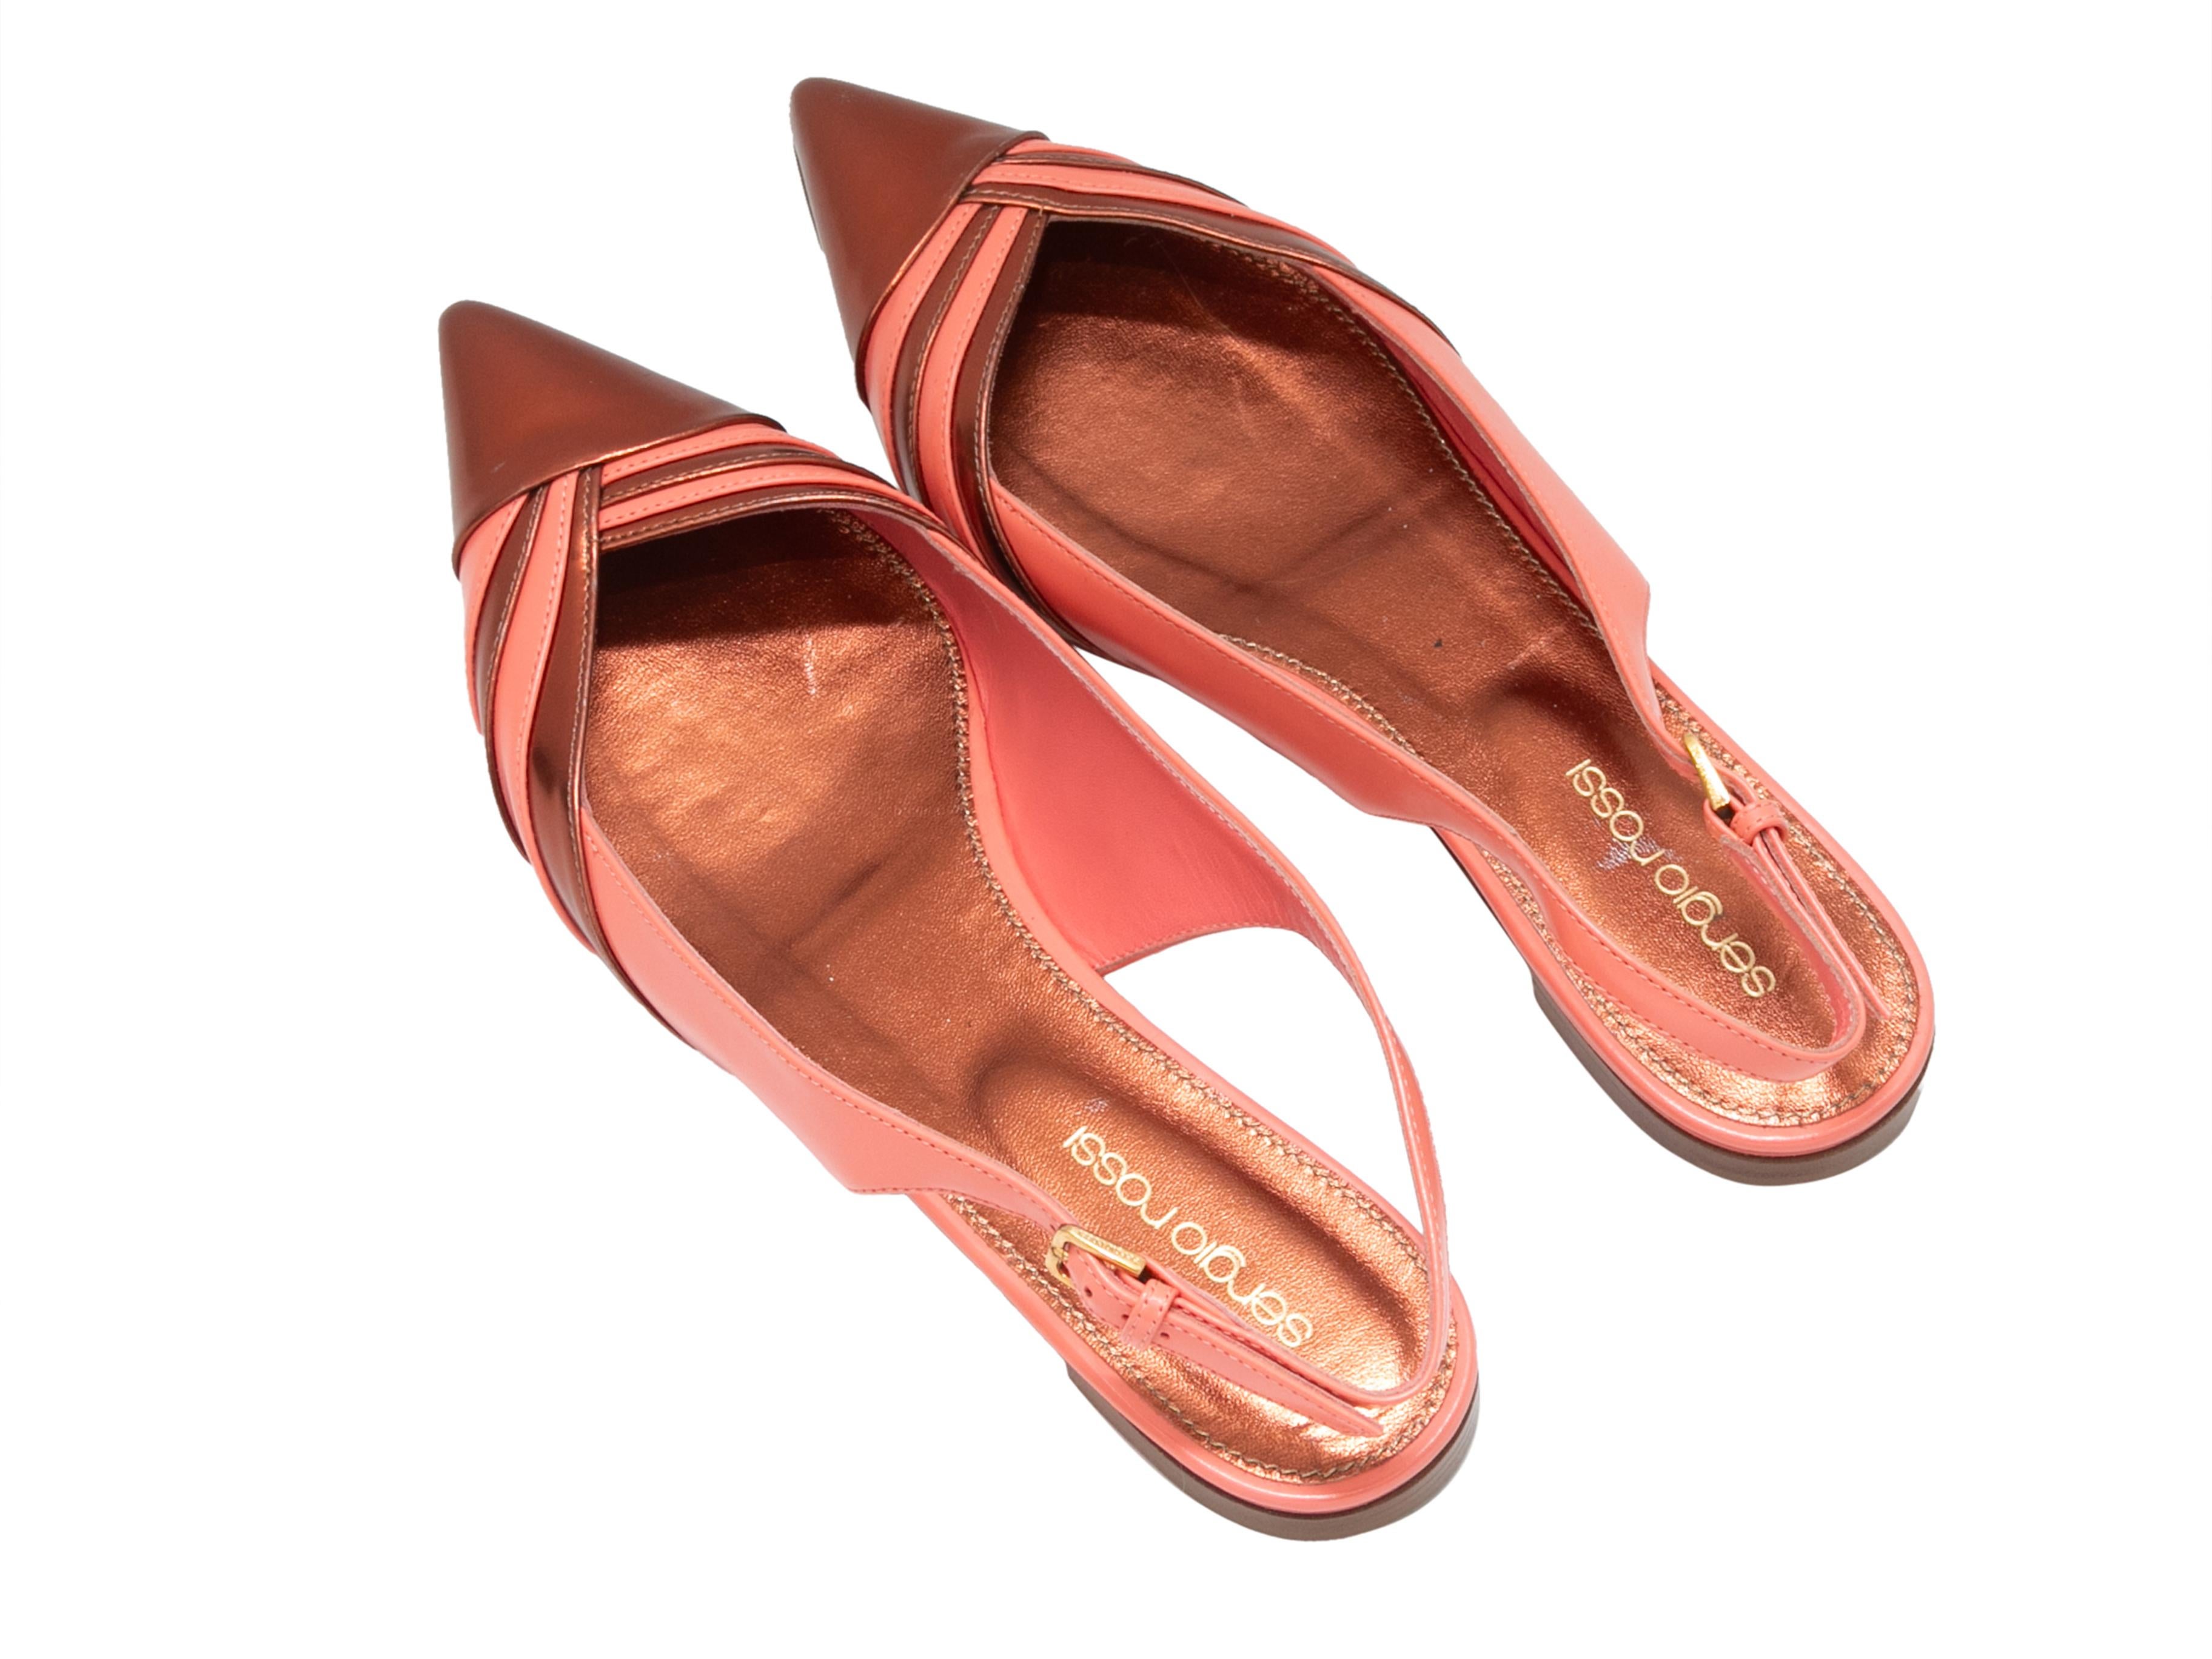 Coral & Copper Sergio Rossi Pointed-Toe Slingback Flats Size 37 In Good Condition For Sale In New York, NY